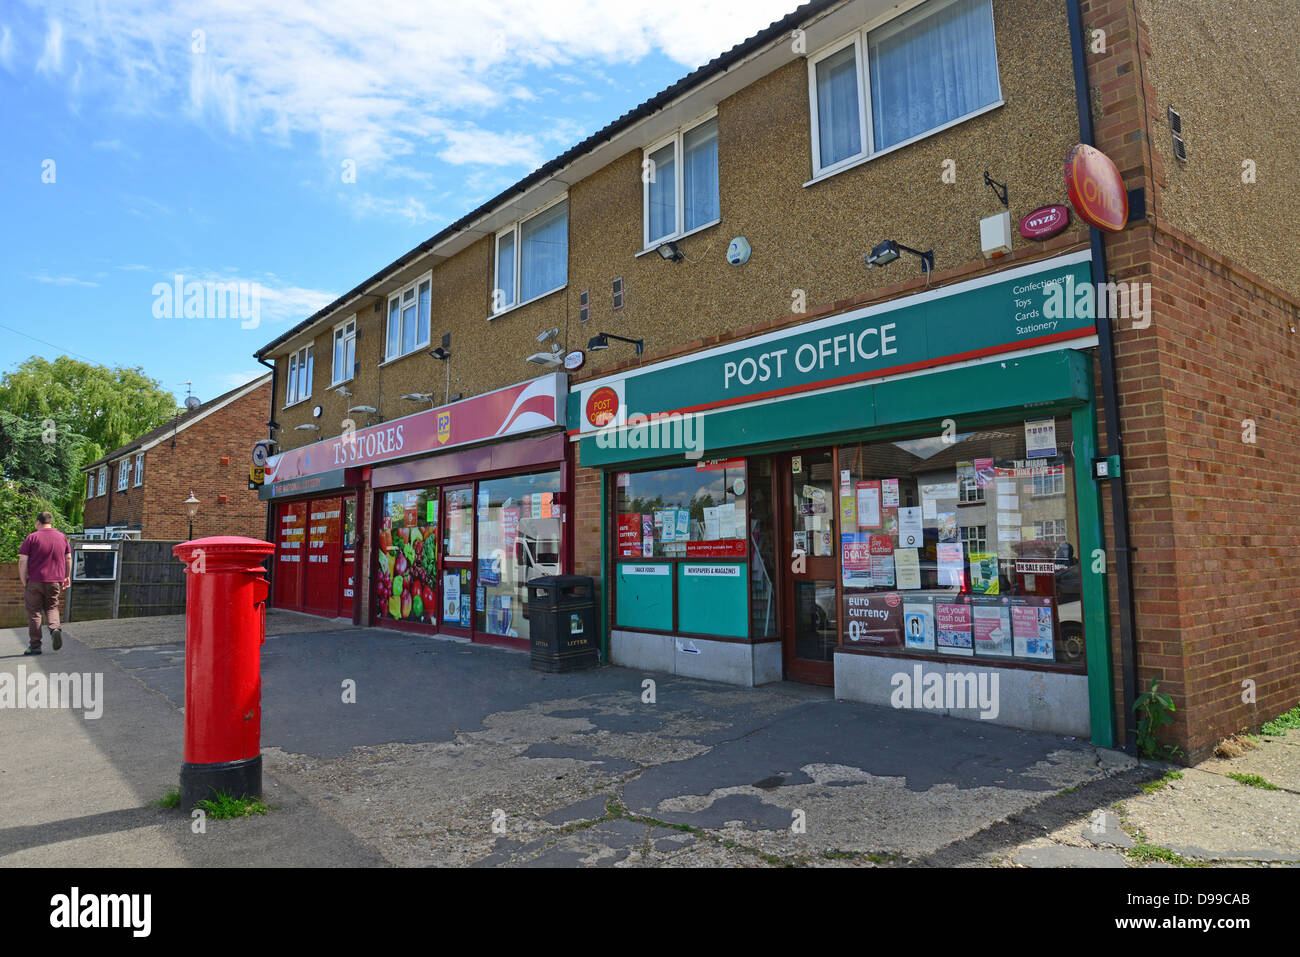 Grocery store and Post Office, Horton Road, Stanwell Moor, Surrey, England, United Kingdom Stock Photo